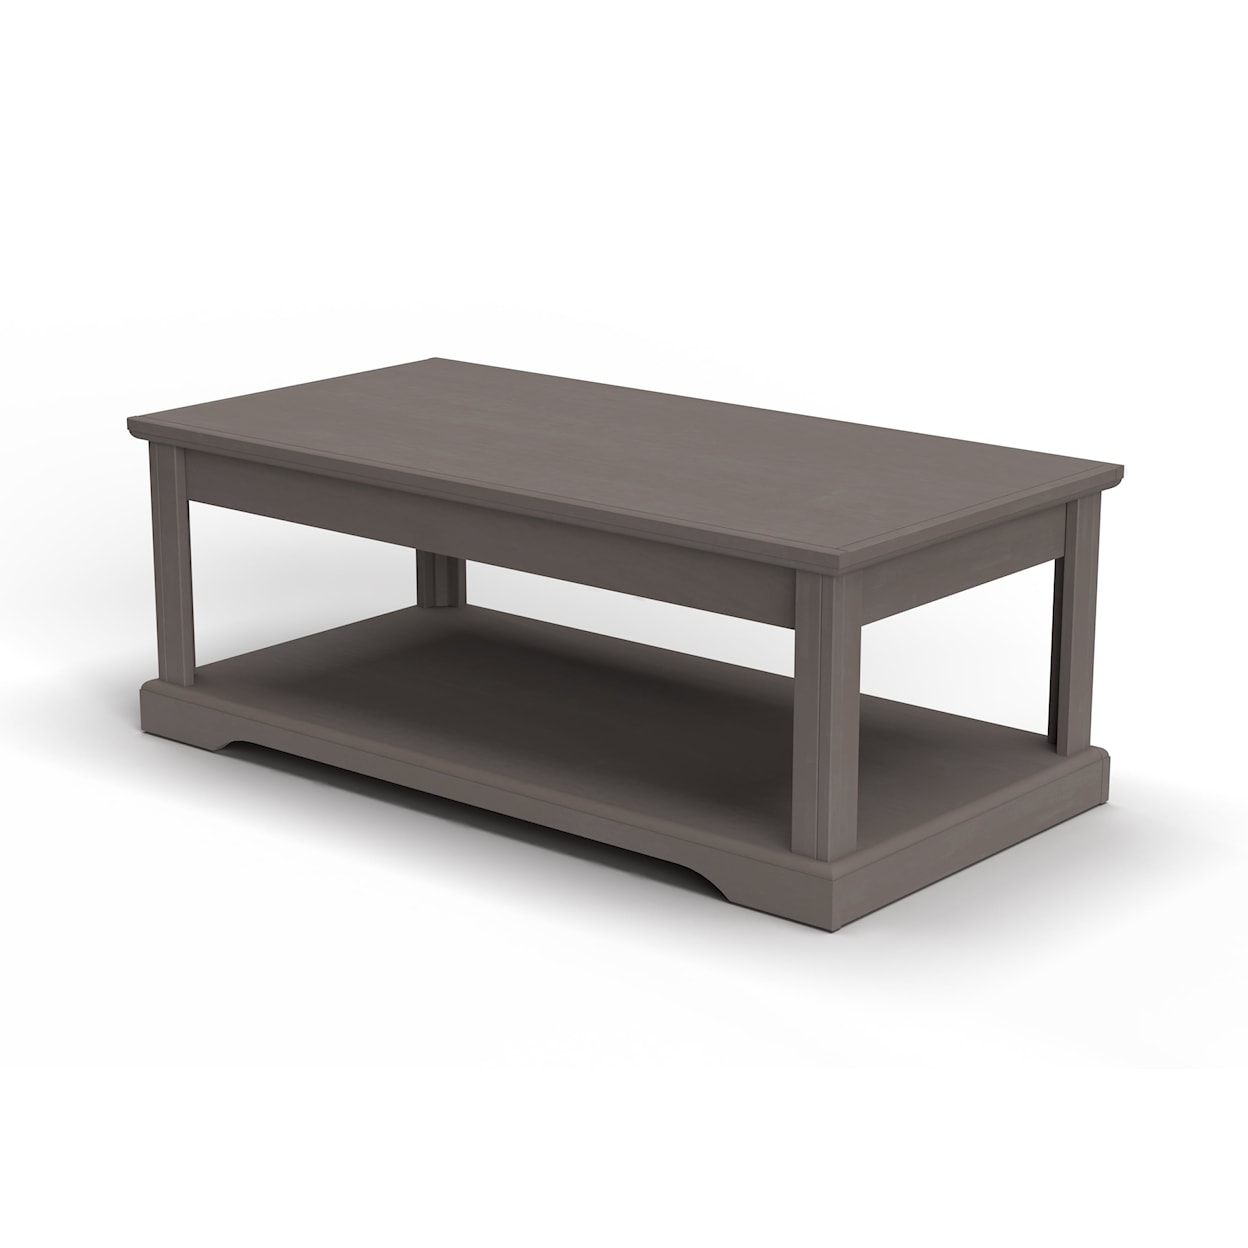 Legends Furniture Cheyenne Coffee Table with Open Shelf